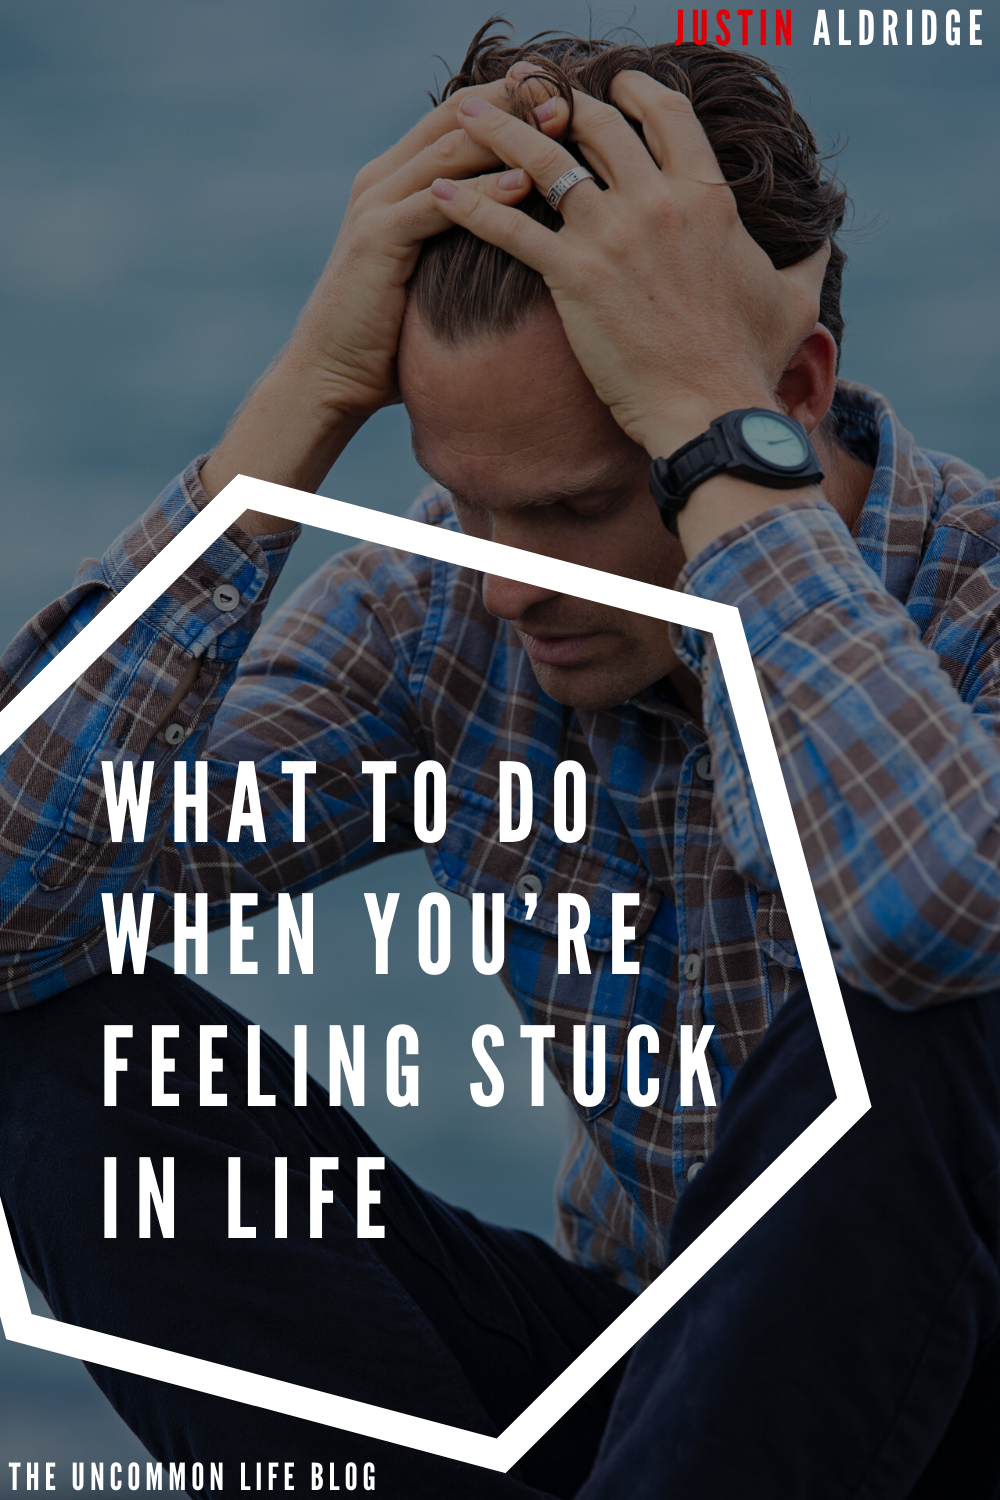 Man sitting down holding his head and staring at the ground behind the text, “What to do when you’re feeling stuck in life” in white font